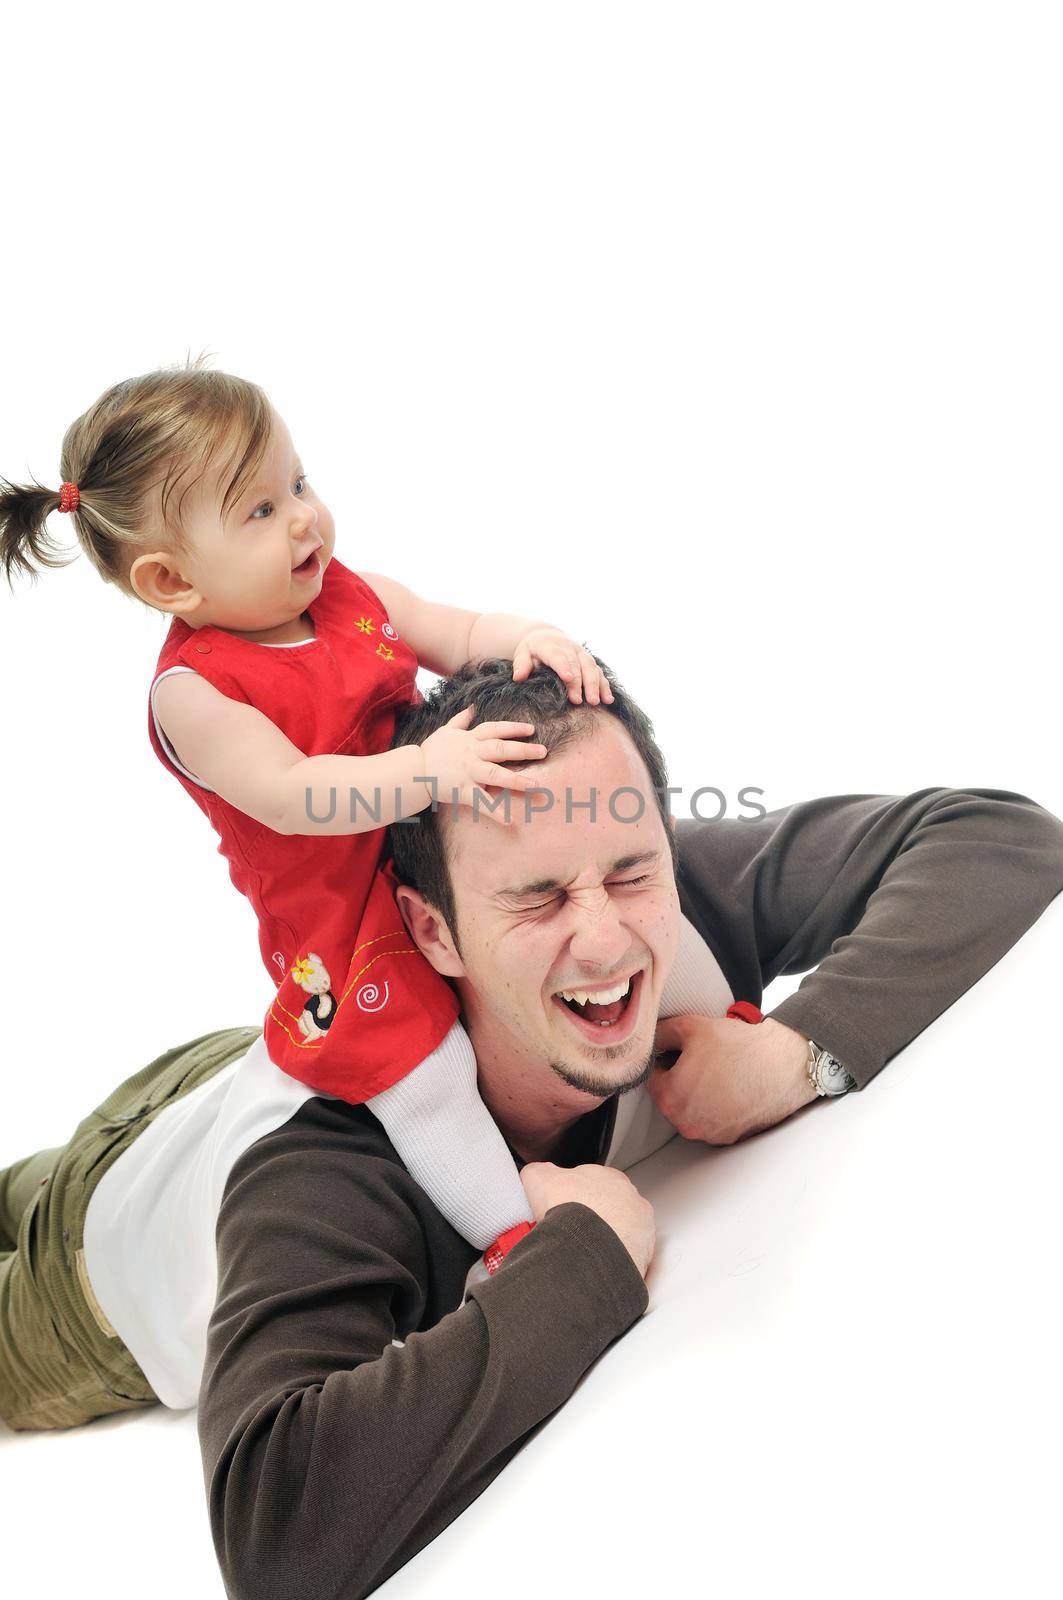 young father man play with beautiful daughter child or baby   isolated on white